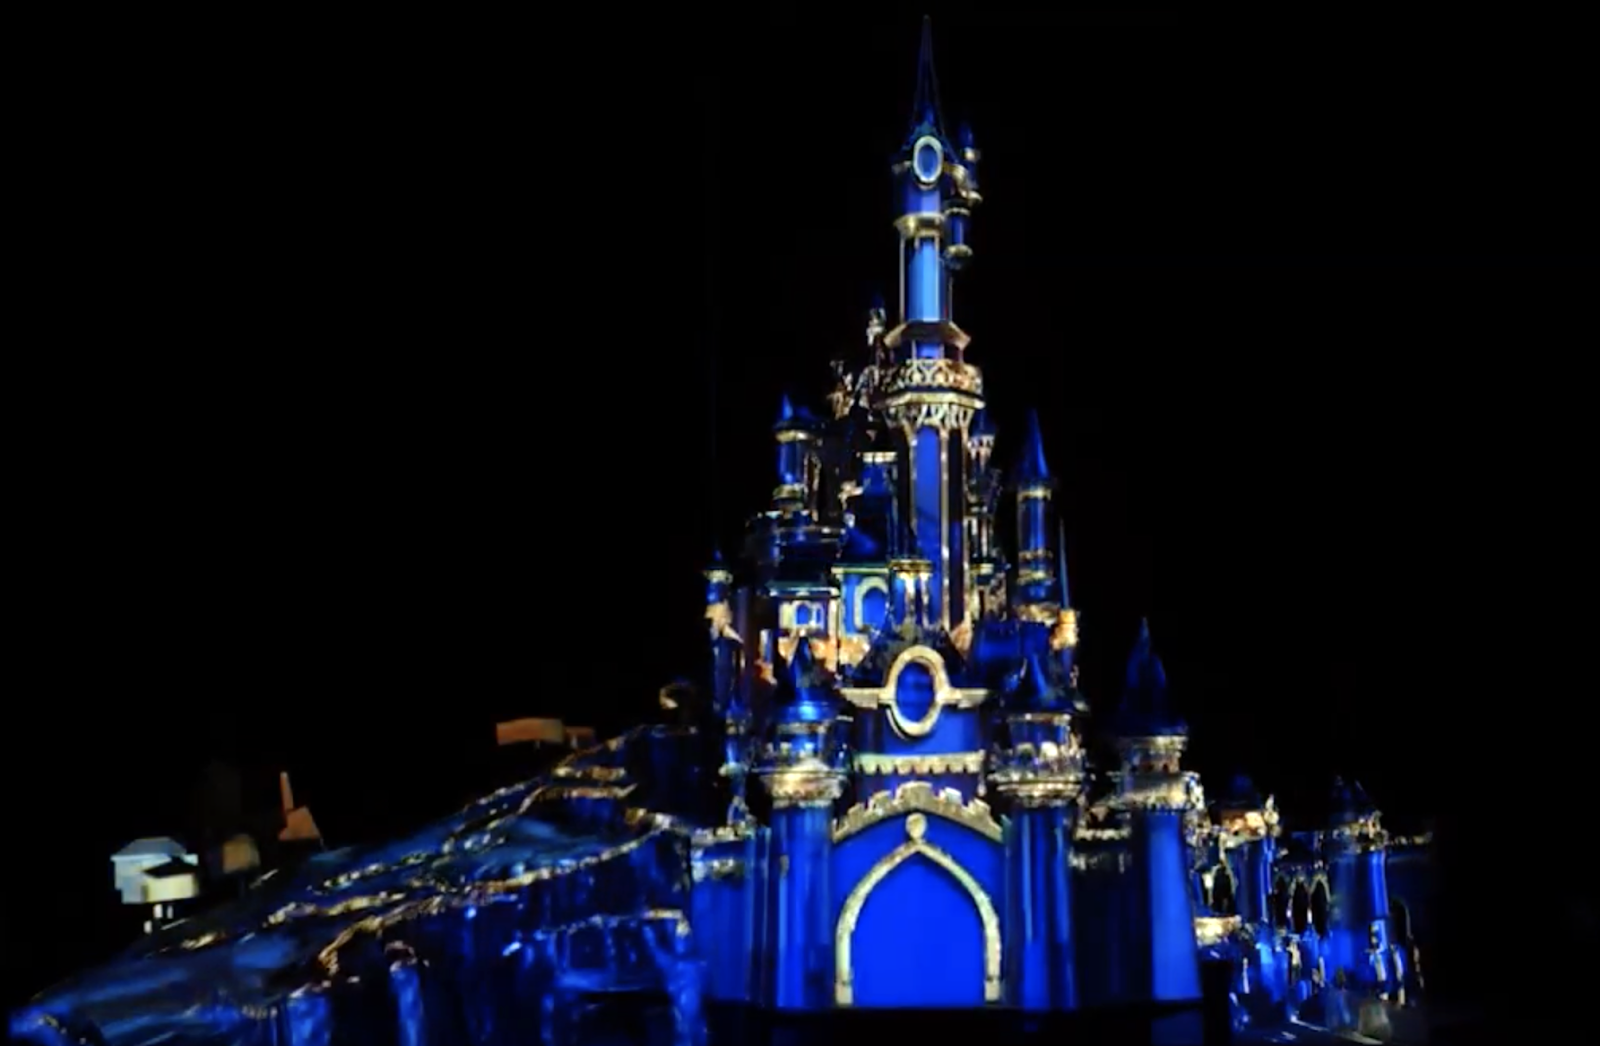 Disney and more: Discover an Exclusive Preview of the Opening Sequence of Disneyland  Paris 25th Anniversary Castle Projection Show Disney Illuminations